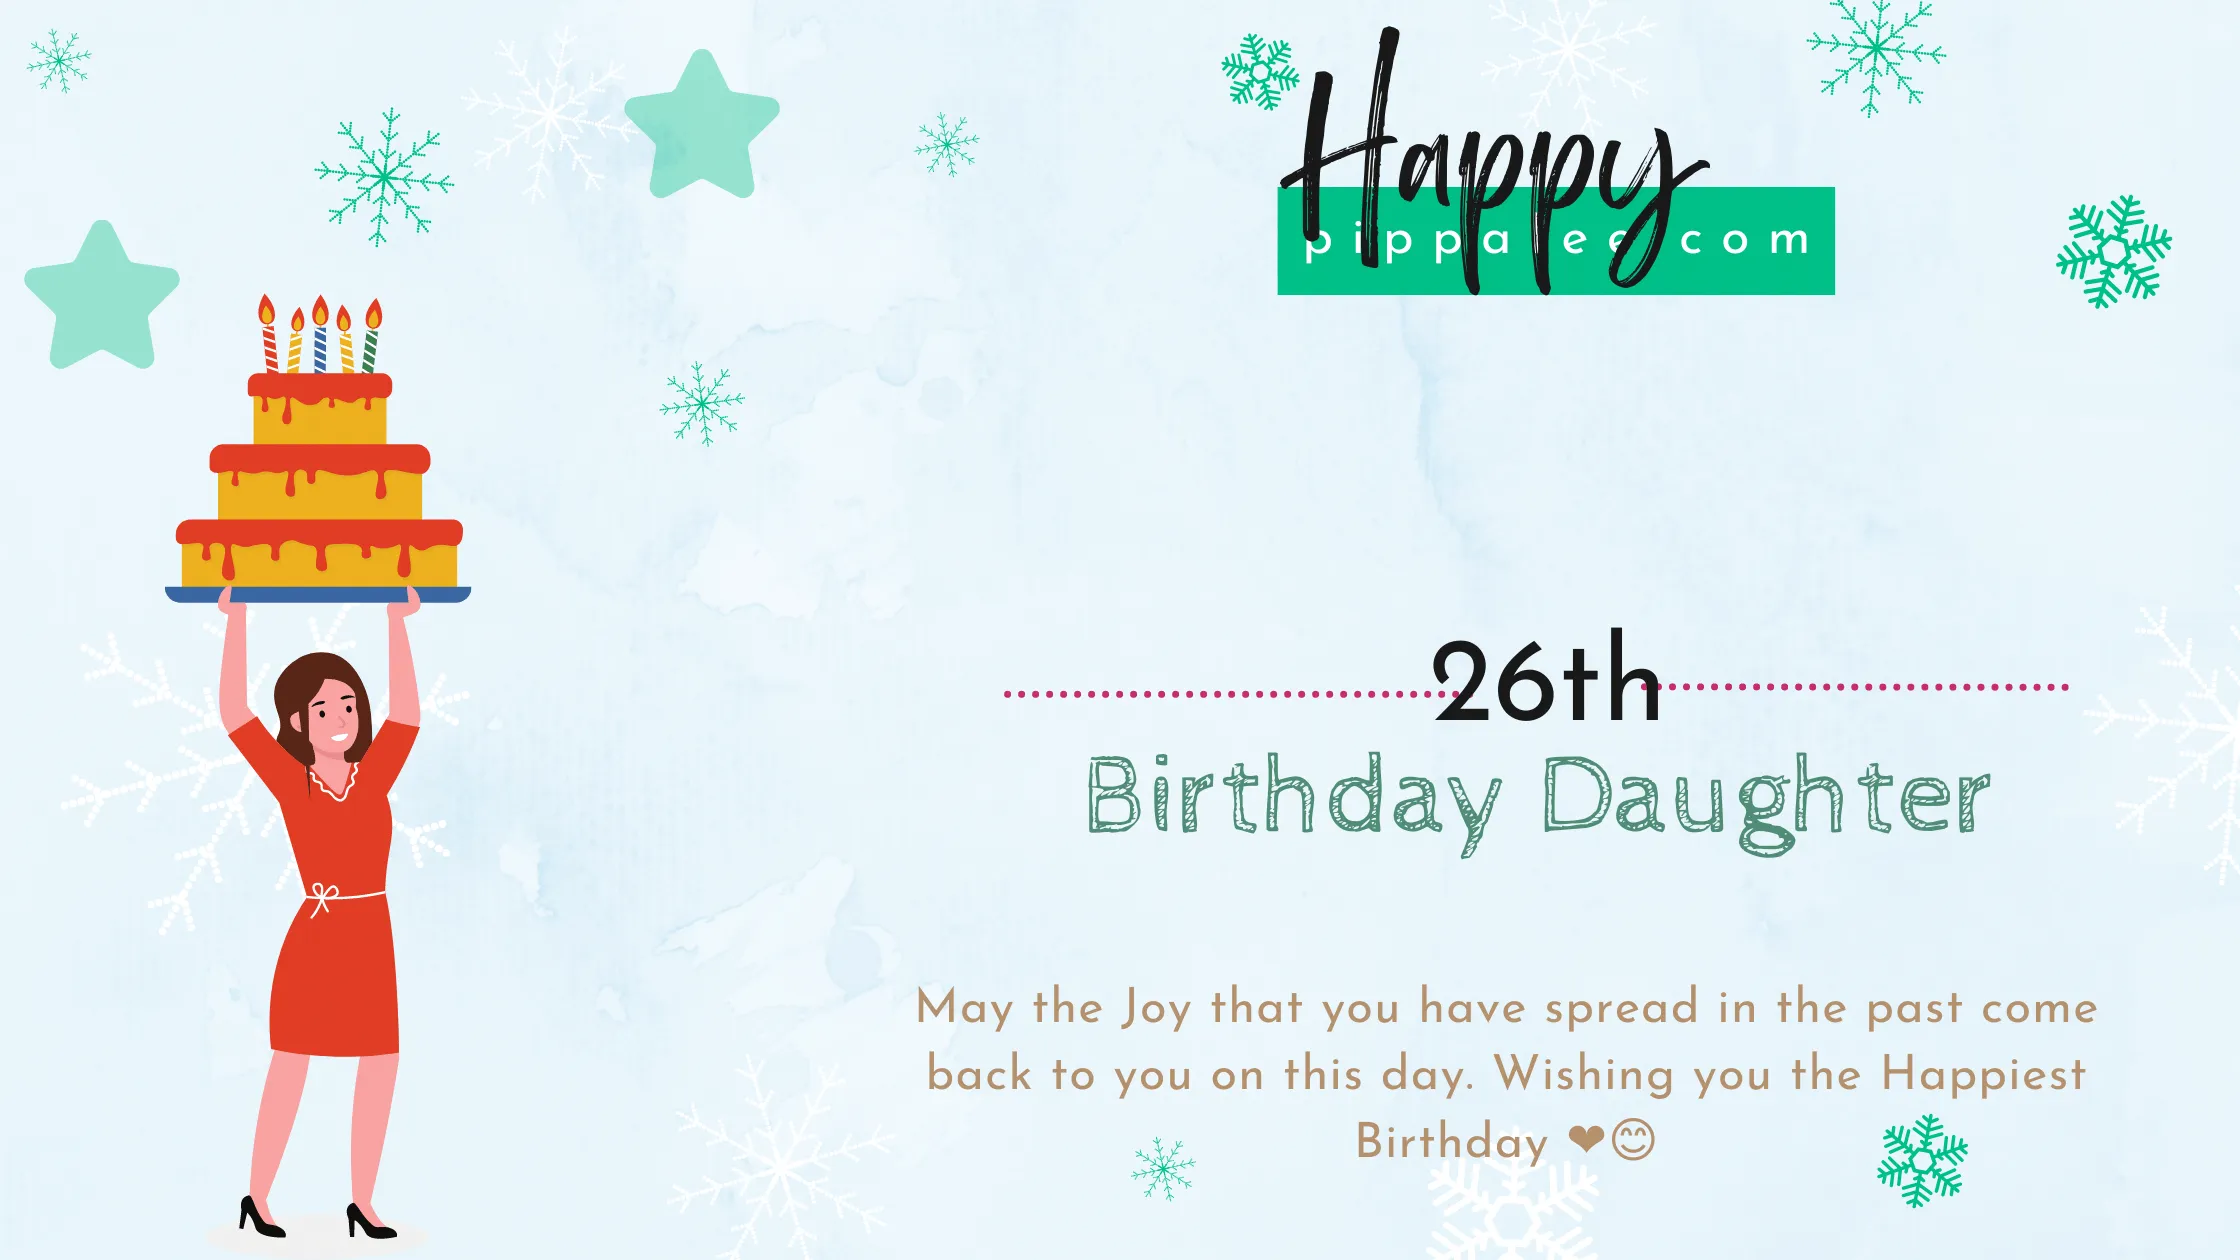 Happy 26th Birthday Daughter - Wishes & Messages